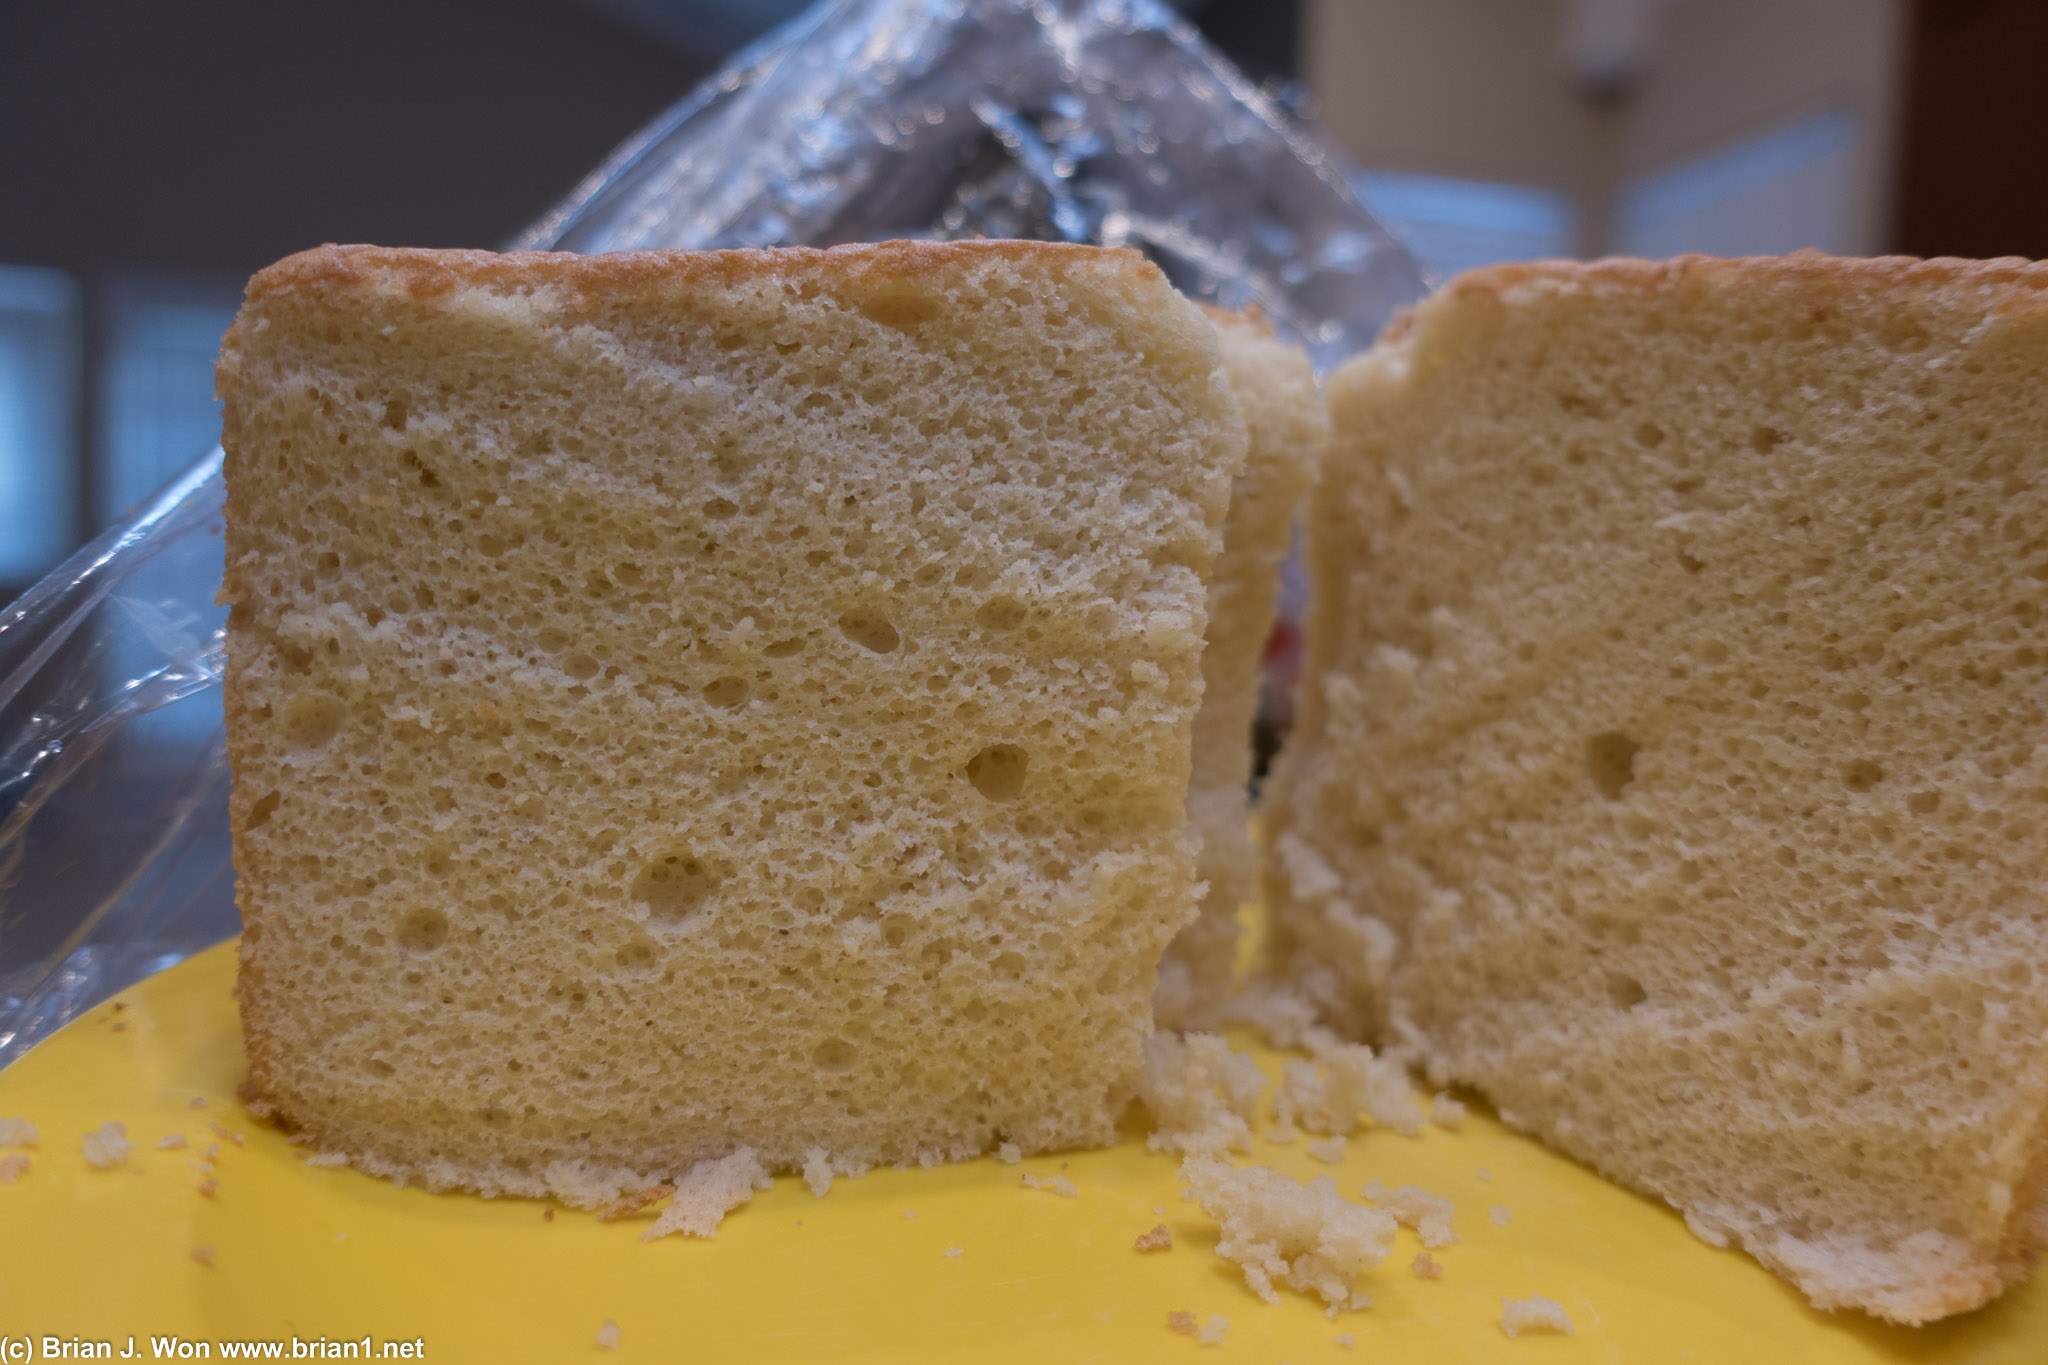 Cross-section of sponge cake. Lines from cutting.